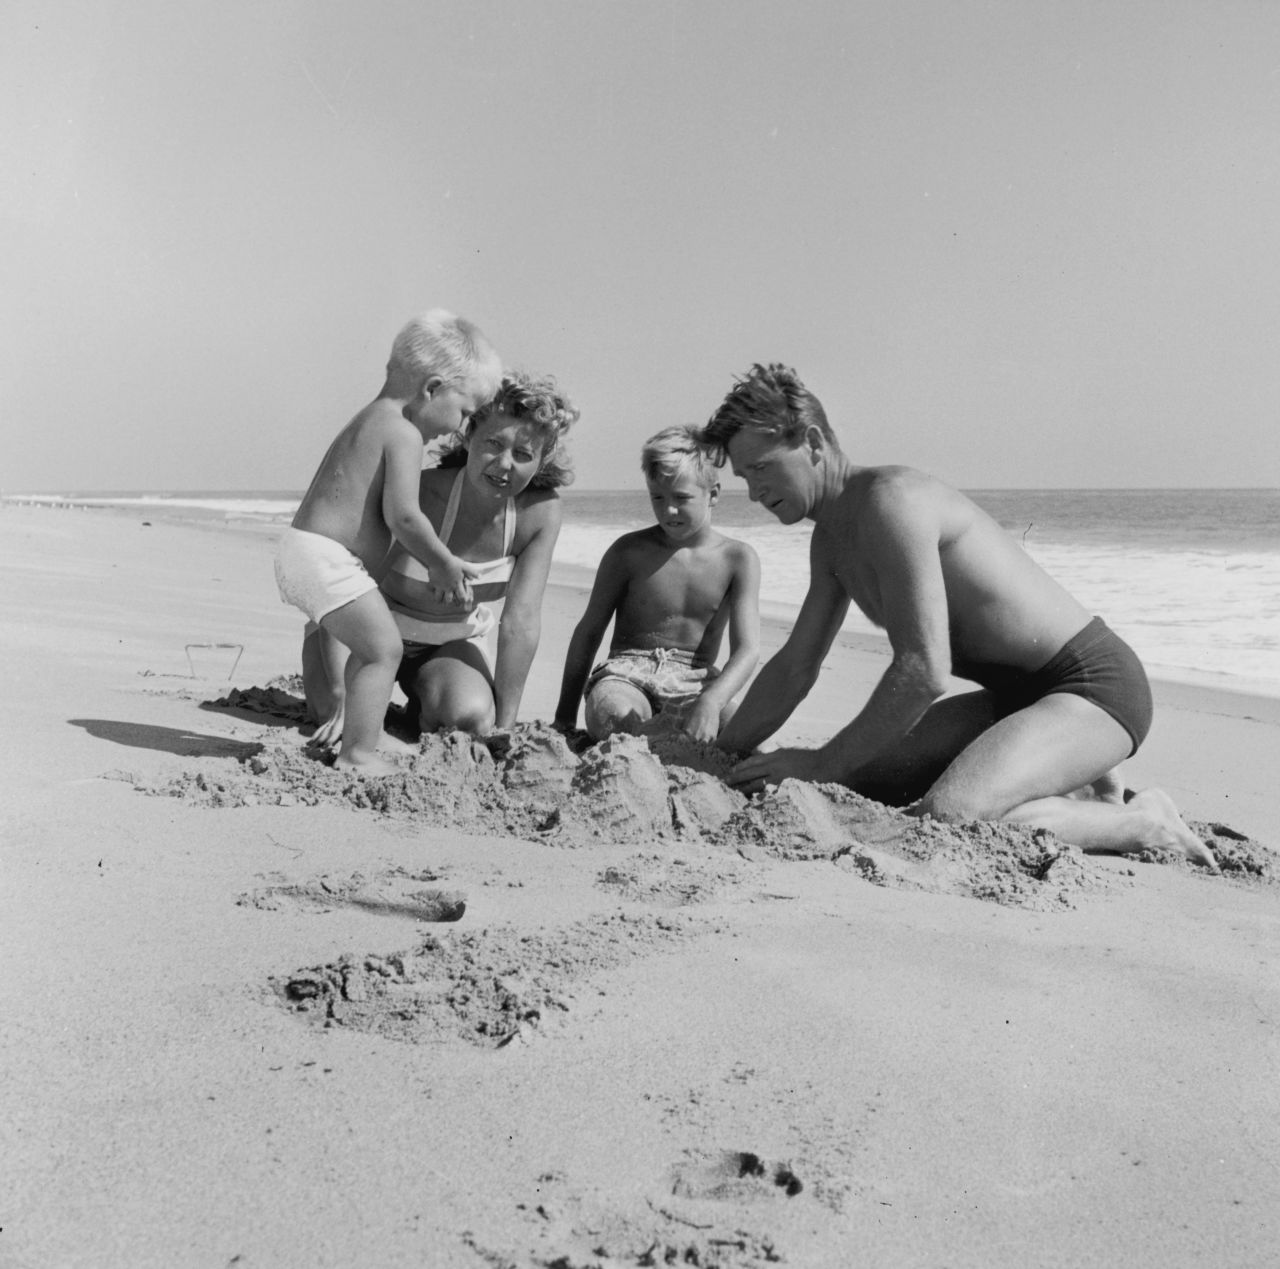 Bridges, seen on the left as a young boy, plays in the sand with his family. Bridges was born in Los Angeles in 1949. Both of his parents, Lloyd and Dorothy, were actors. His older brother, Beau, also became an actor.